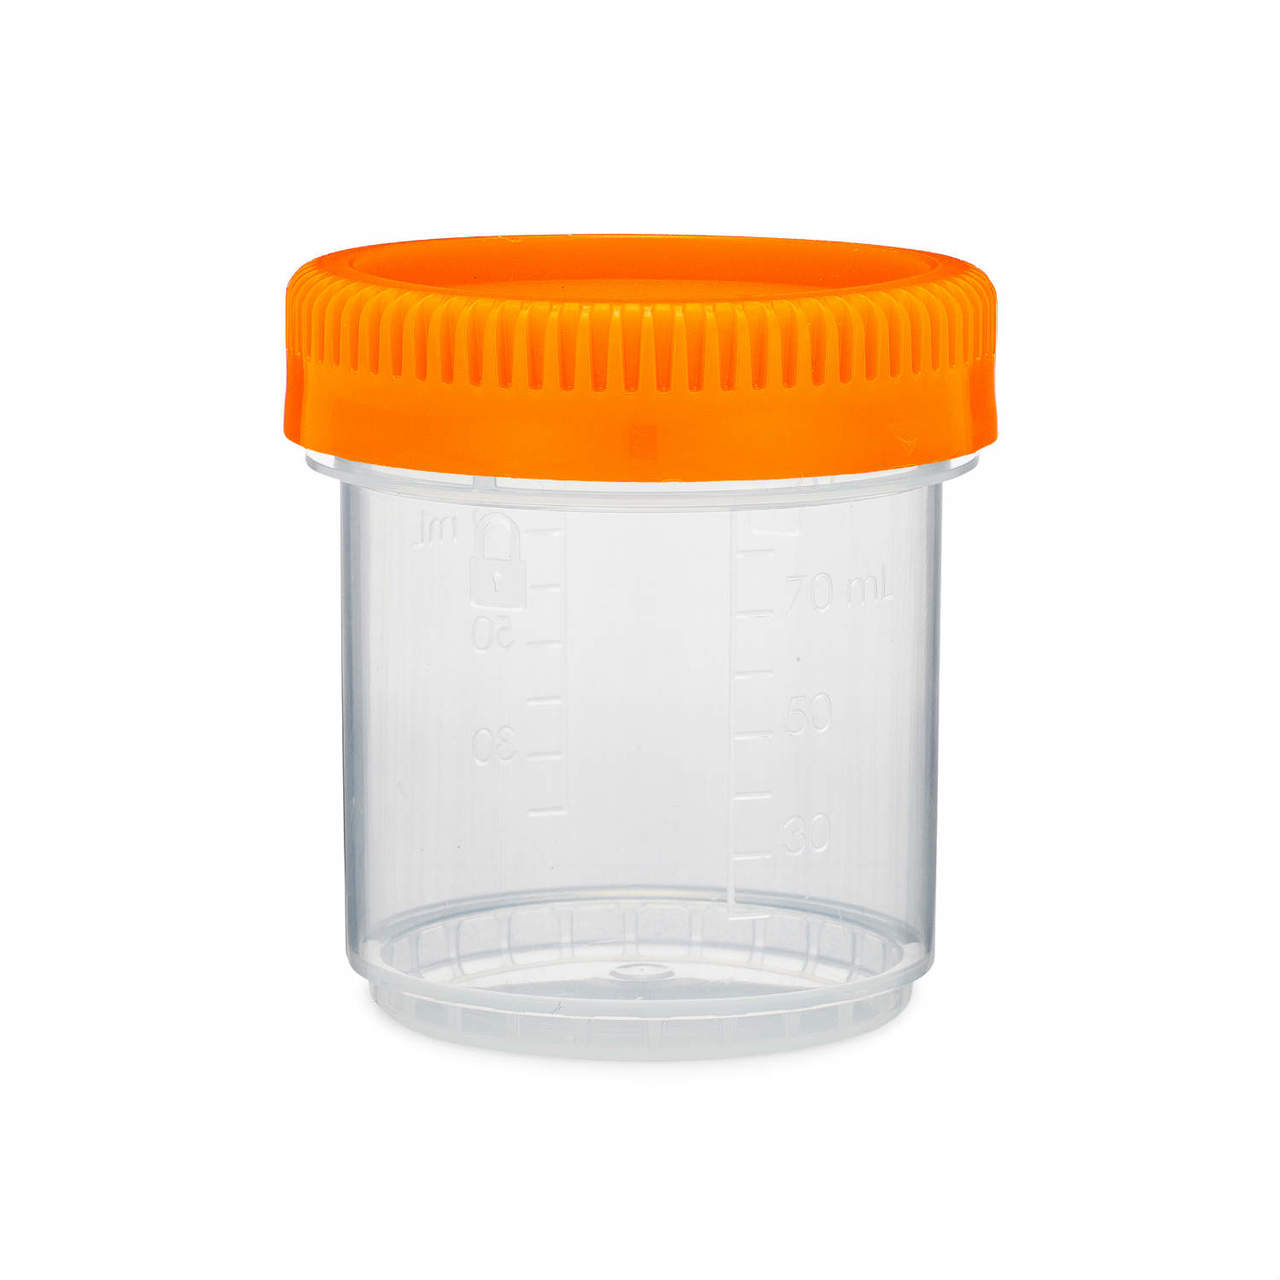 Sterilite™ Container (3.8 L/16 Cup). Life Science Products